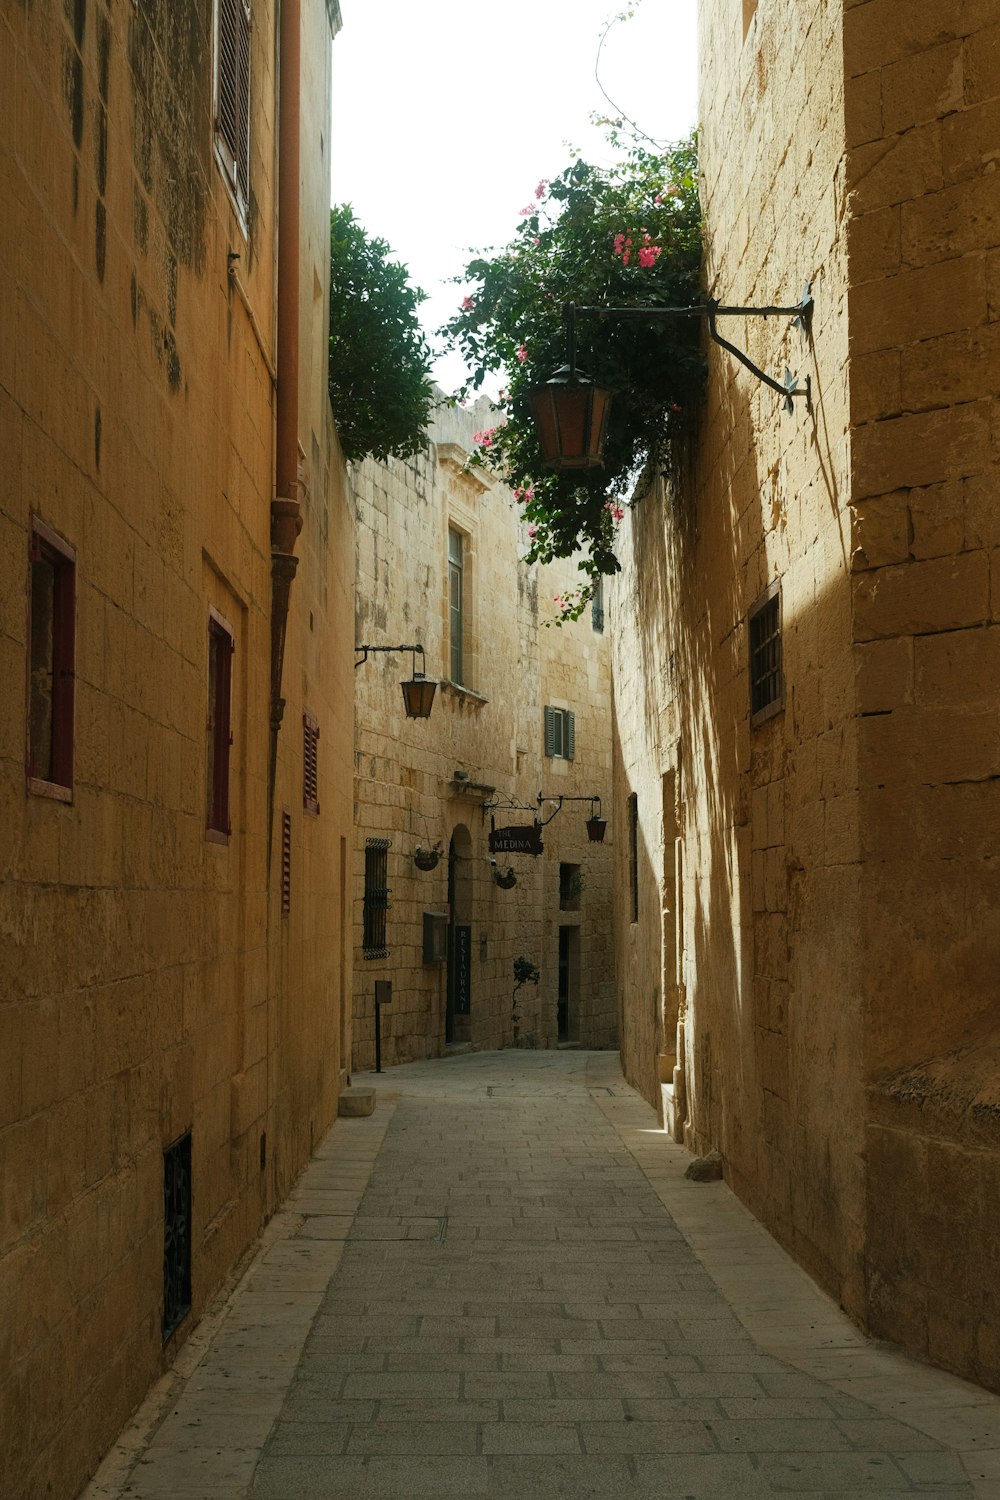 a narrow alley way with a potted plant on the wall